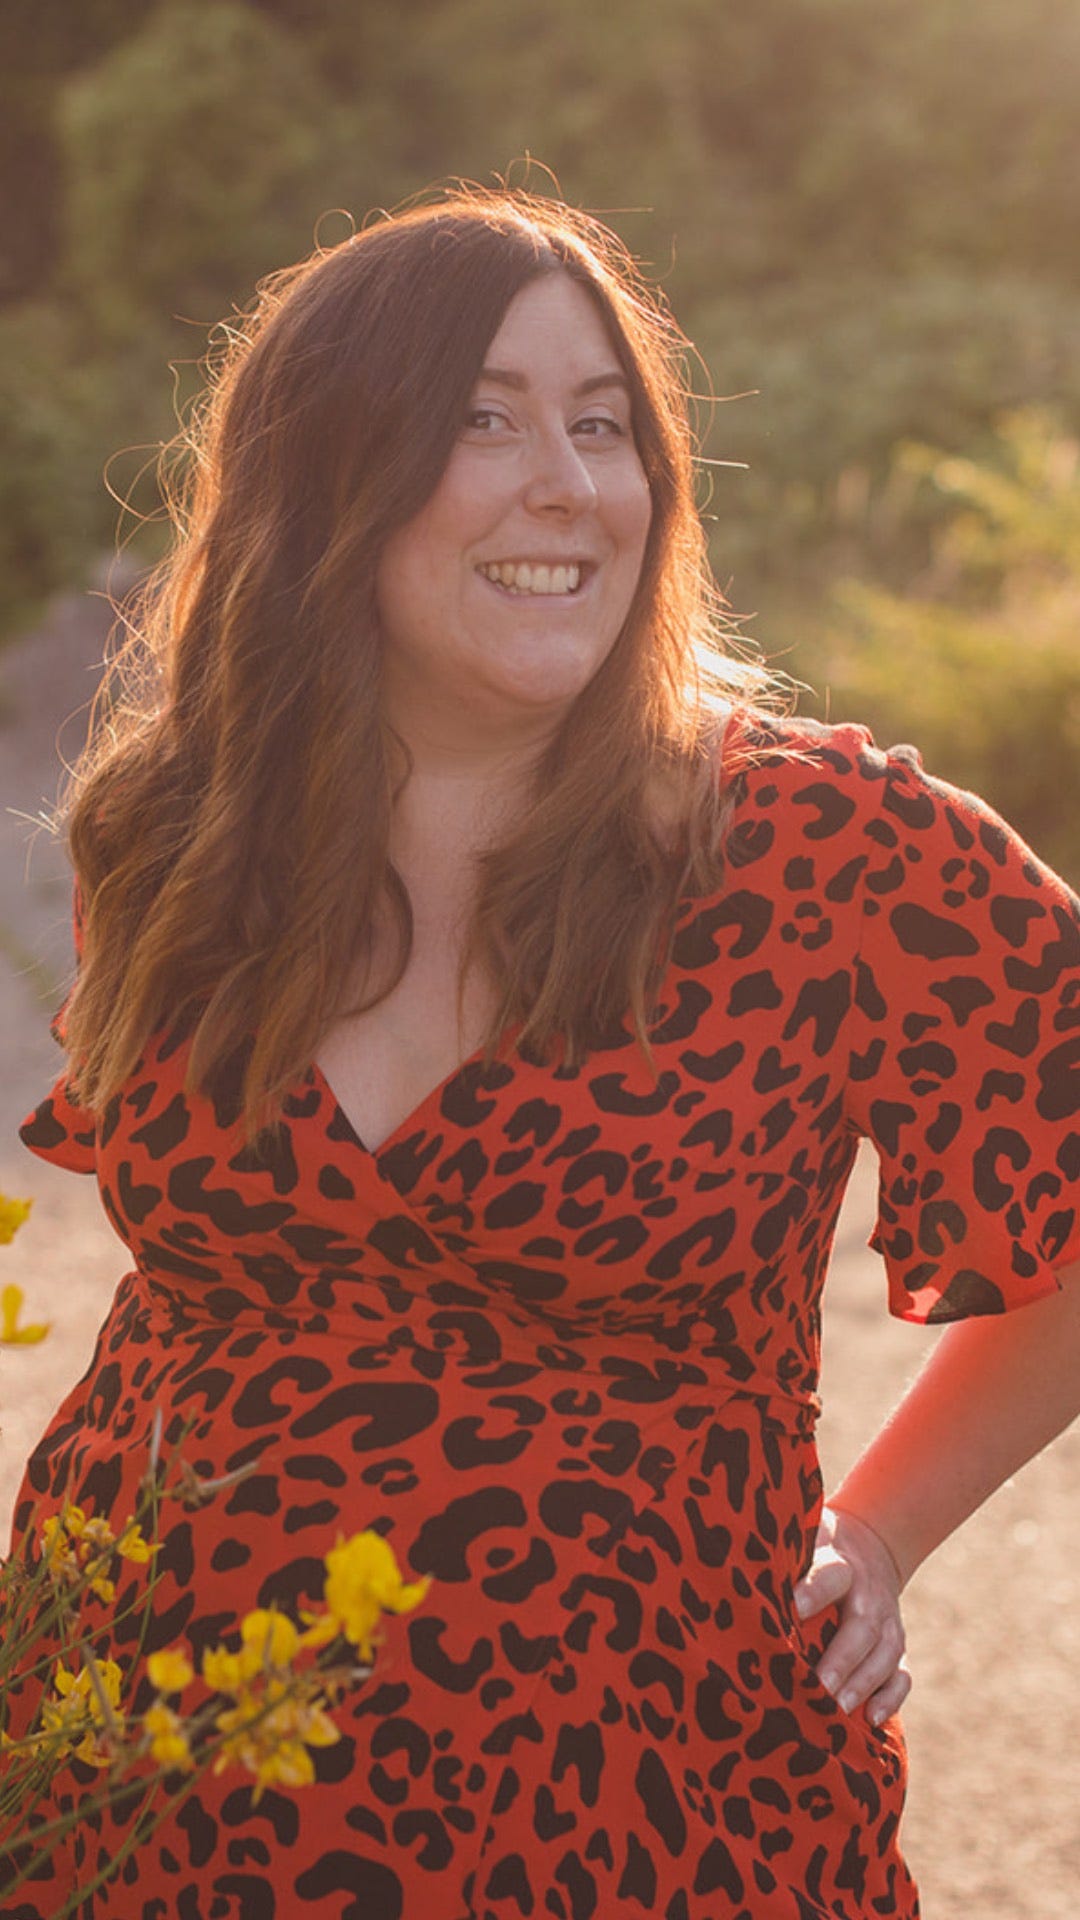 Headshot of today's guest, Jeanette, wearing a red and black leopard print dress outdoors